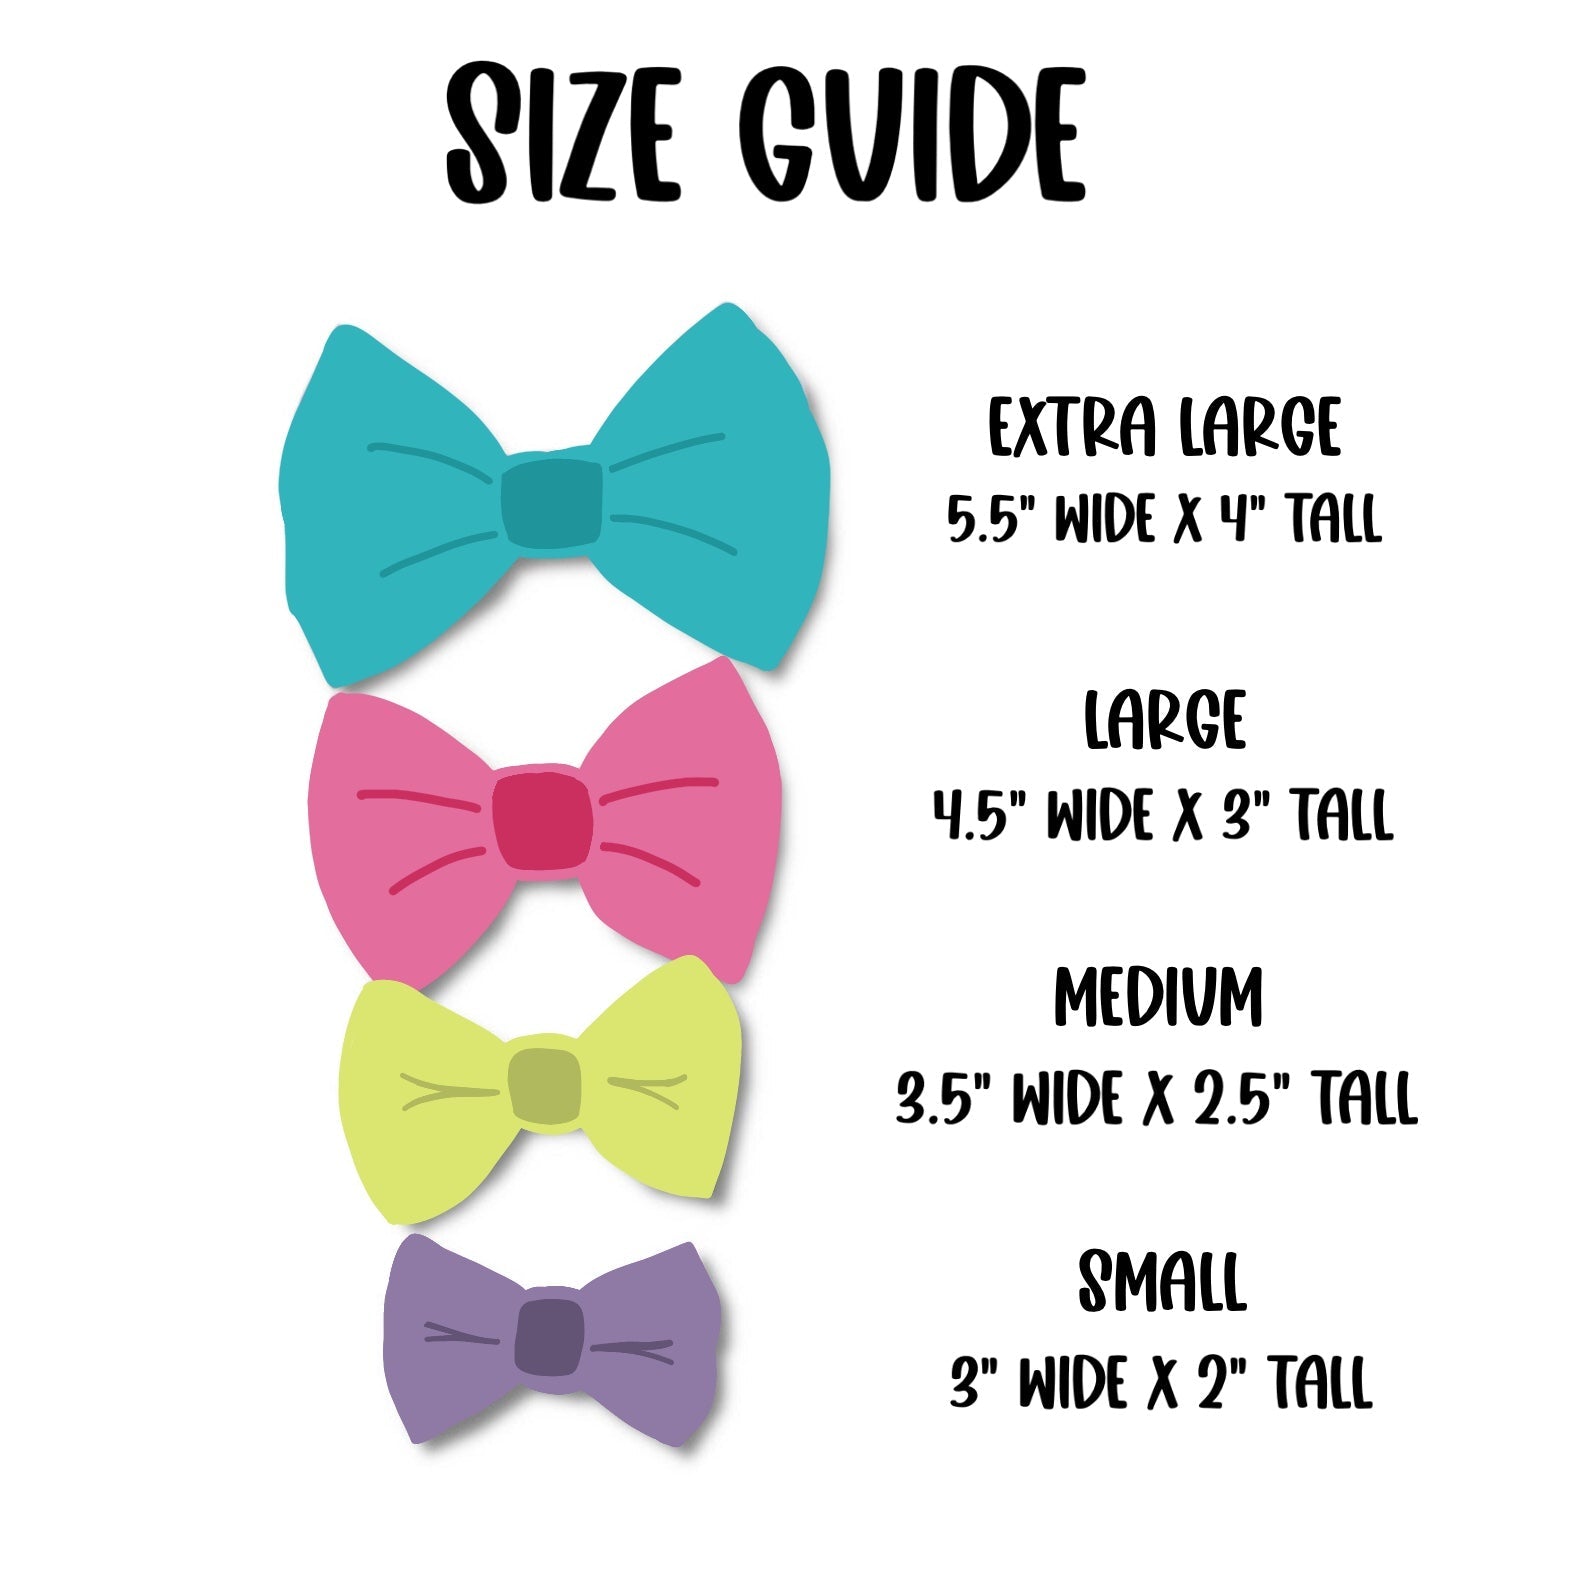 Dainty Daisy Girly Bow - The Paw Pack Goods